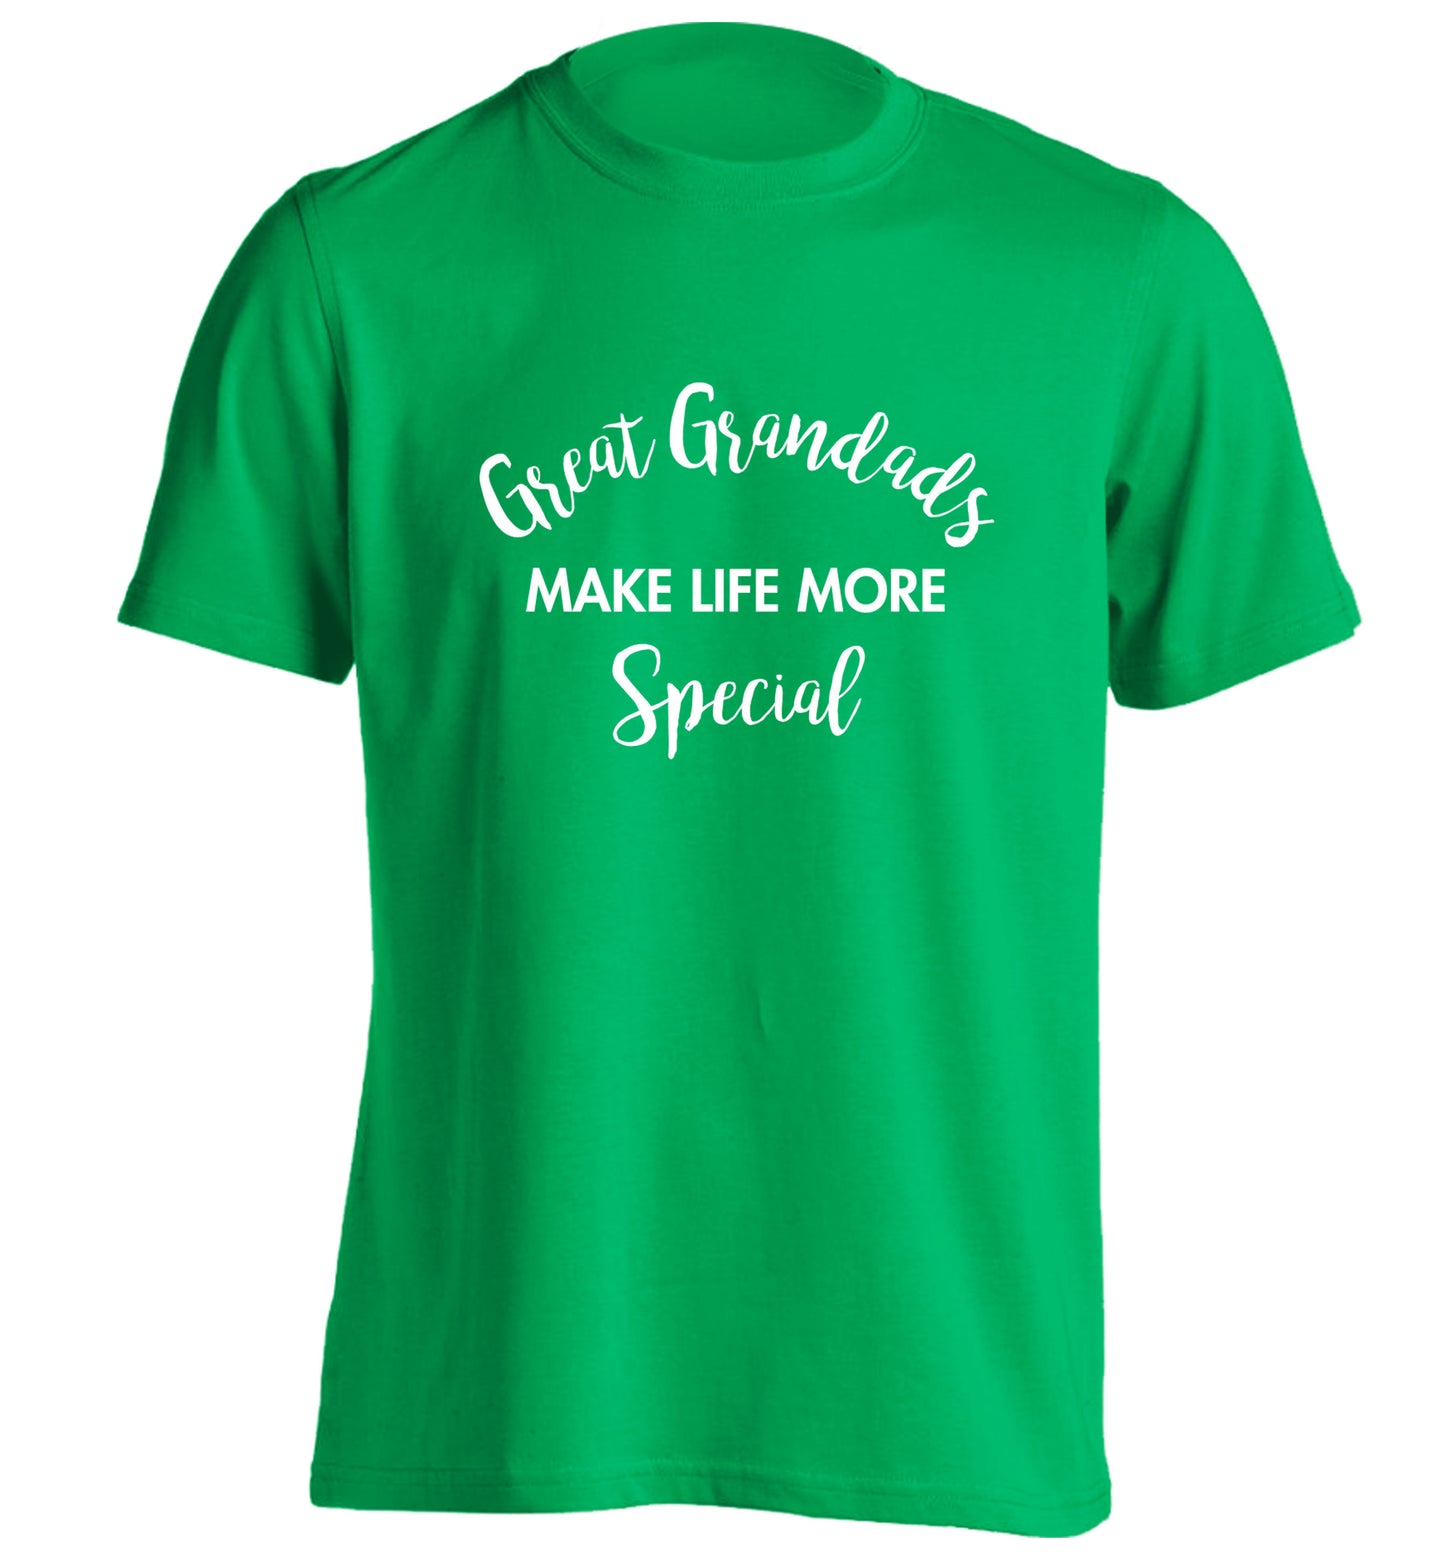 Great Grandads make life more special adults unisex green Tshirt 2XL